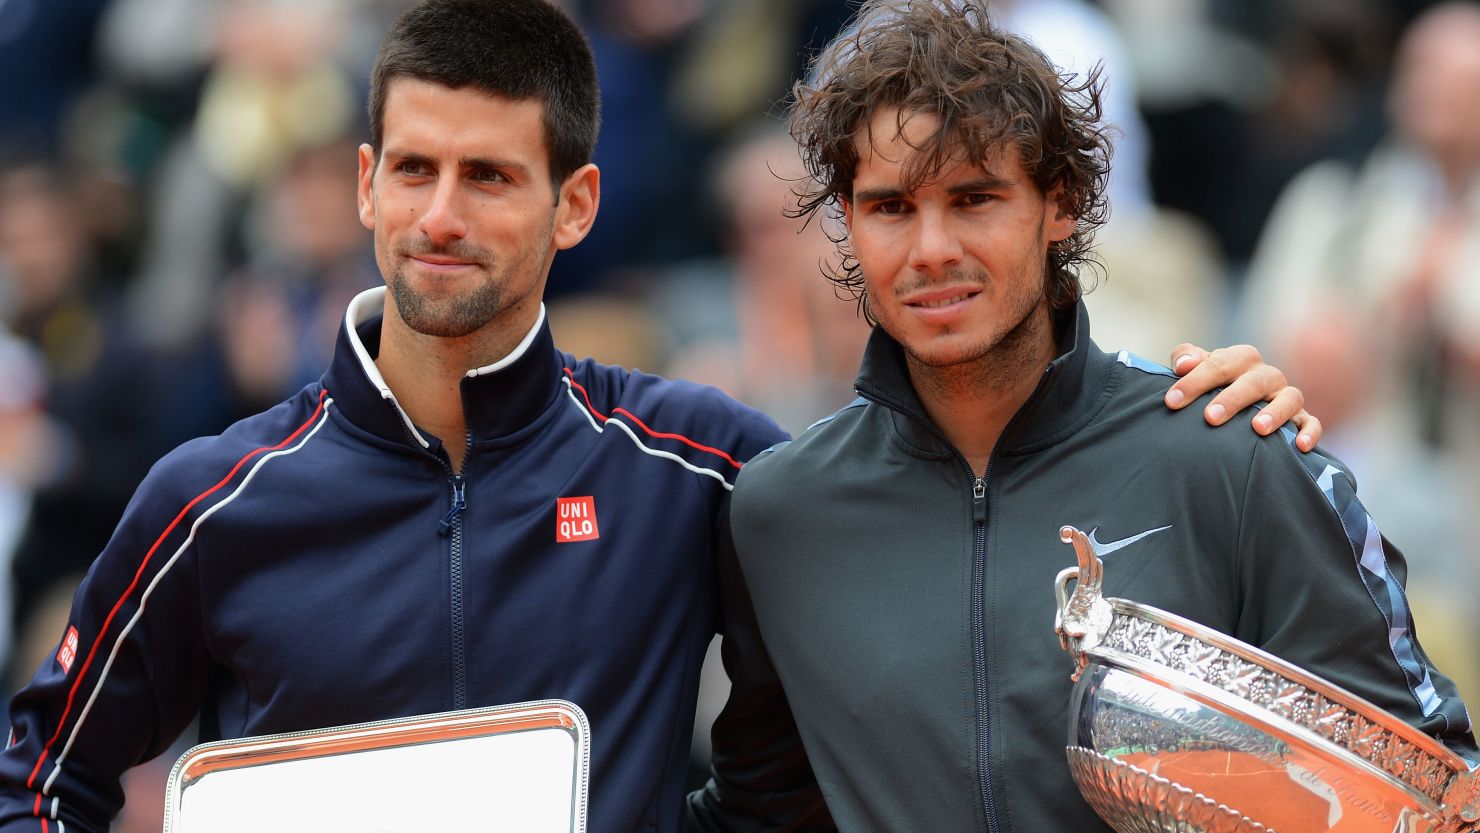 Rafael Nadal celebrates his French Open title success in 2012 with runner-up Novak Djokovic.